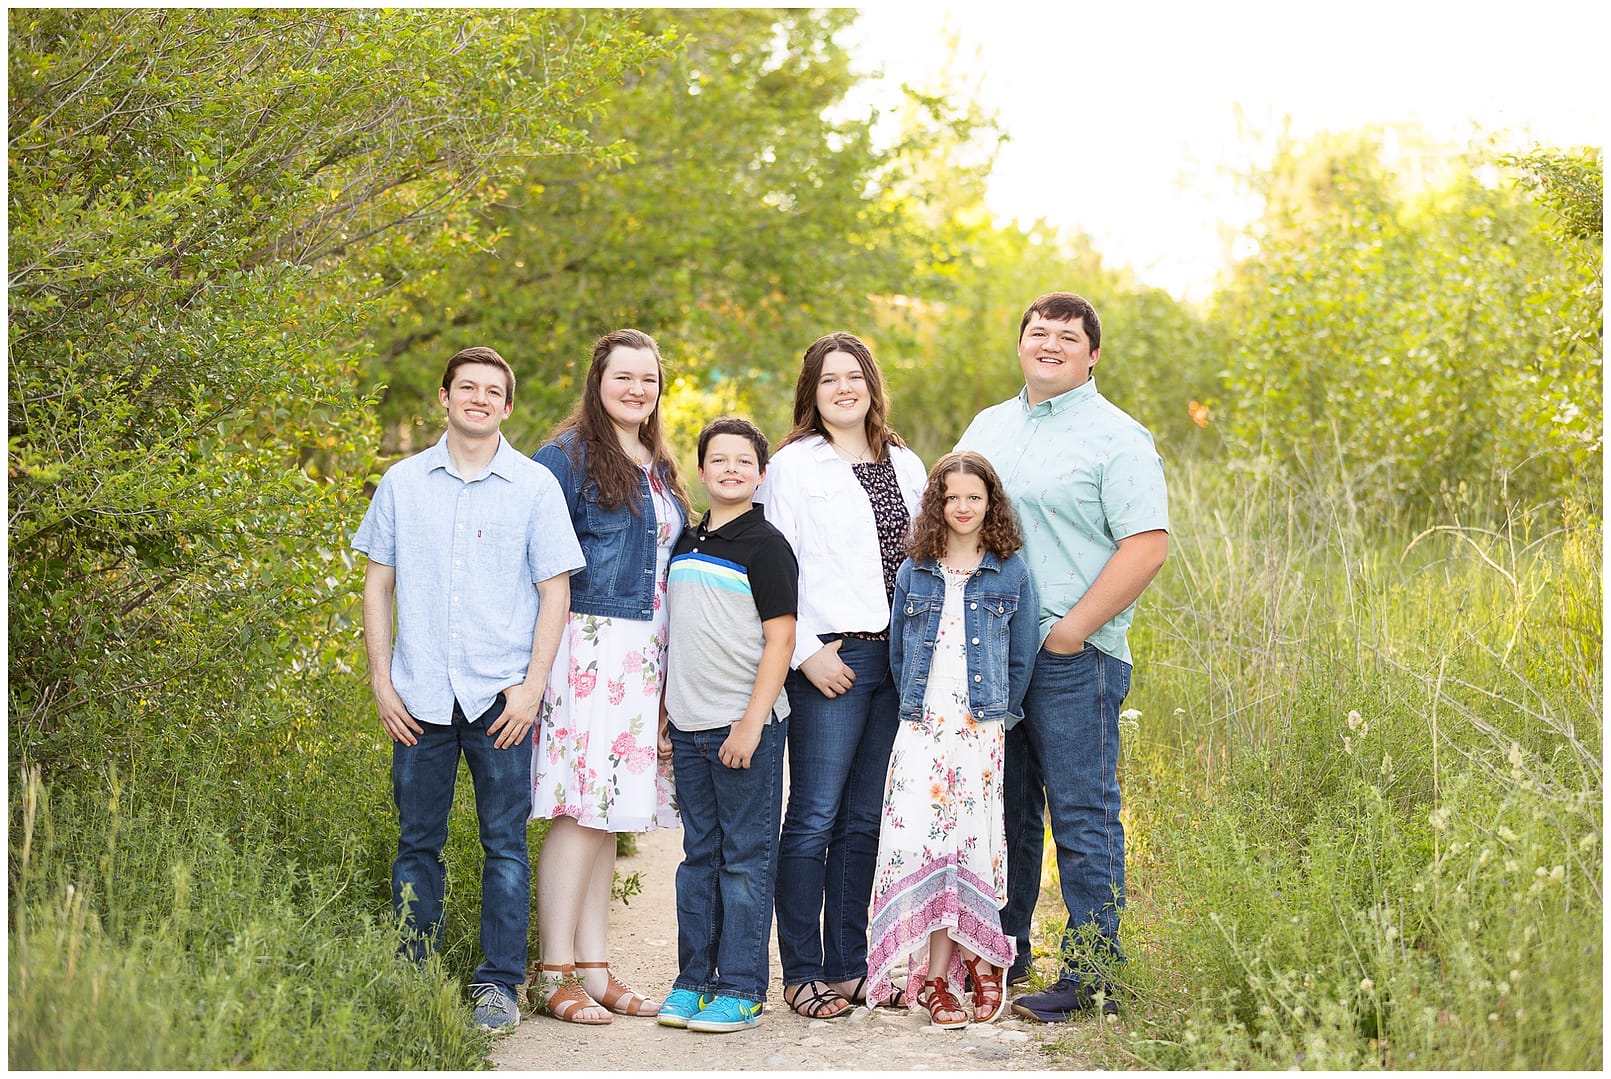 Six siblings pose for photograph. Photo by Tiffany Hix Photography.